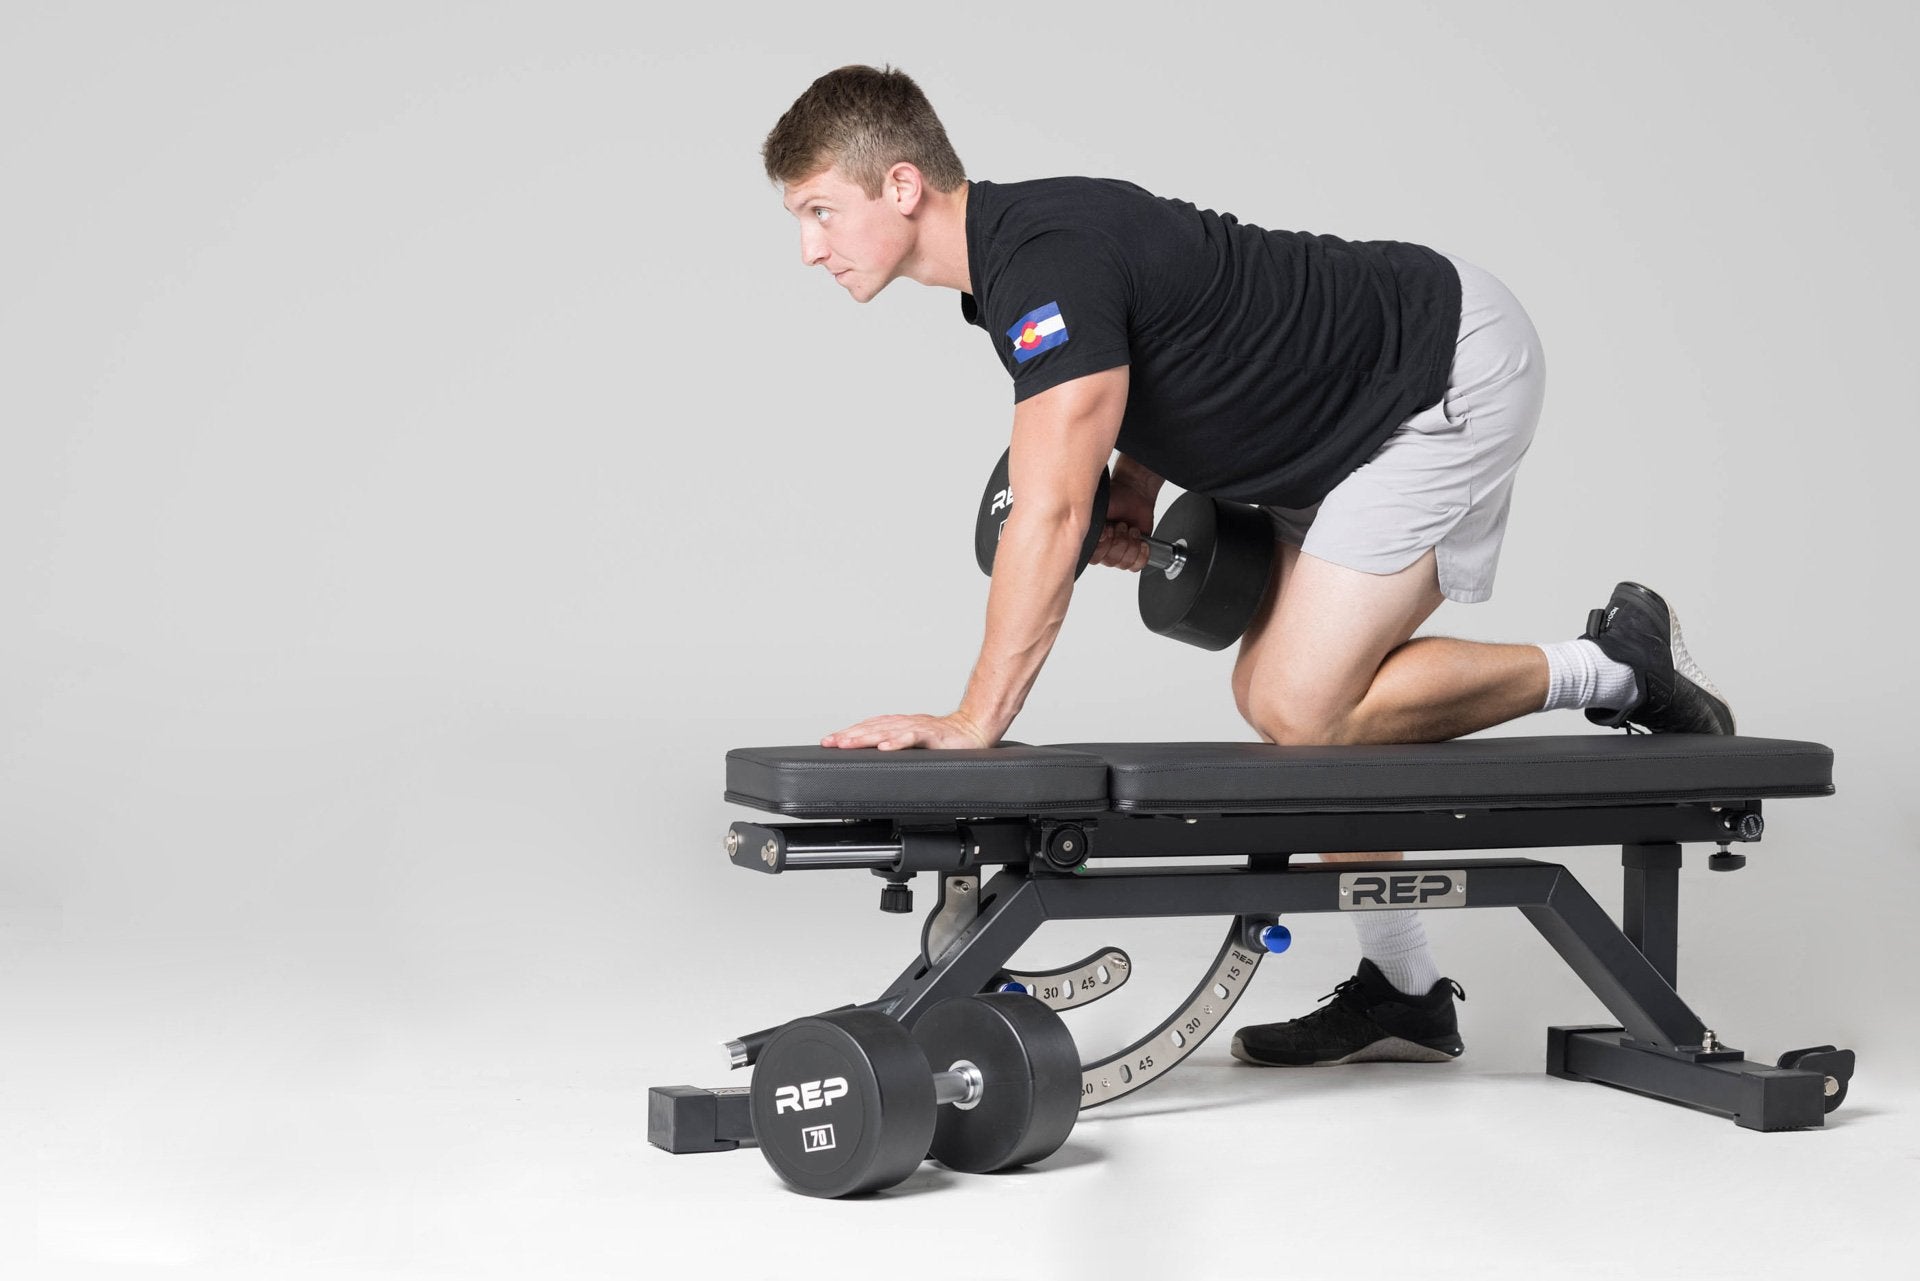 Lifter positioned on an AB-5000 bench performing a single-arm row with a 70lb Urethane Dumbbell.